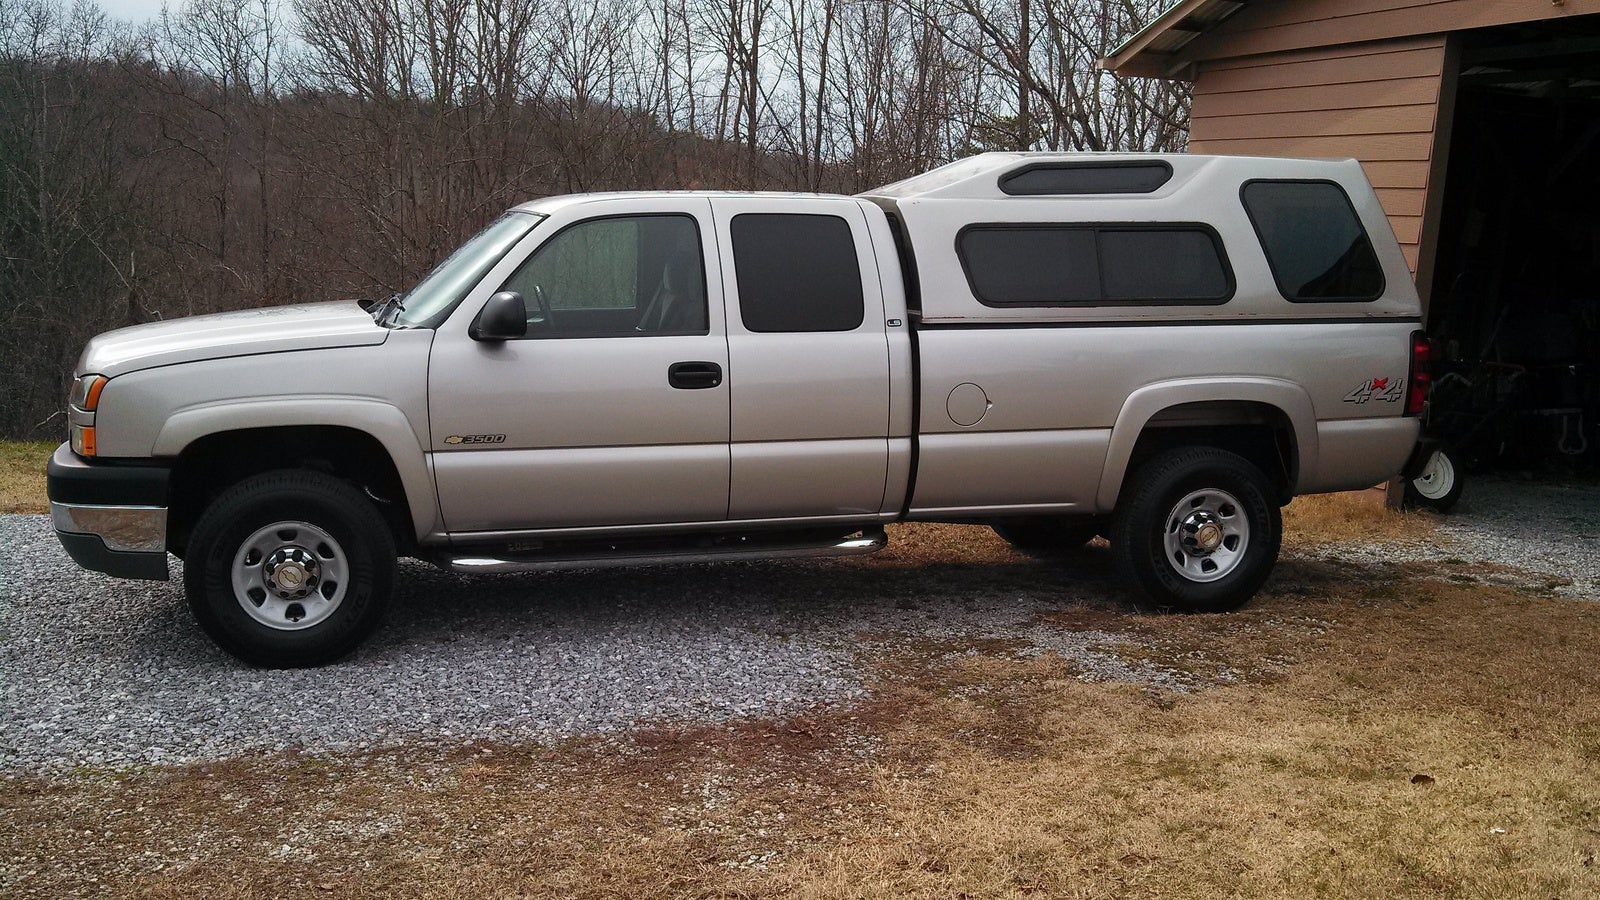 Ronnie S Towing Service: 2005 Chevy Silverado 4 3 Towing Capacity 2005 Chevy 2500hd 8.1 Towing Capacity